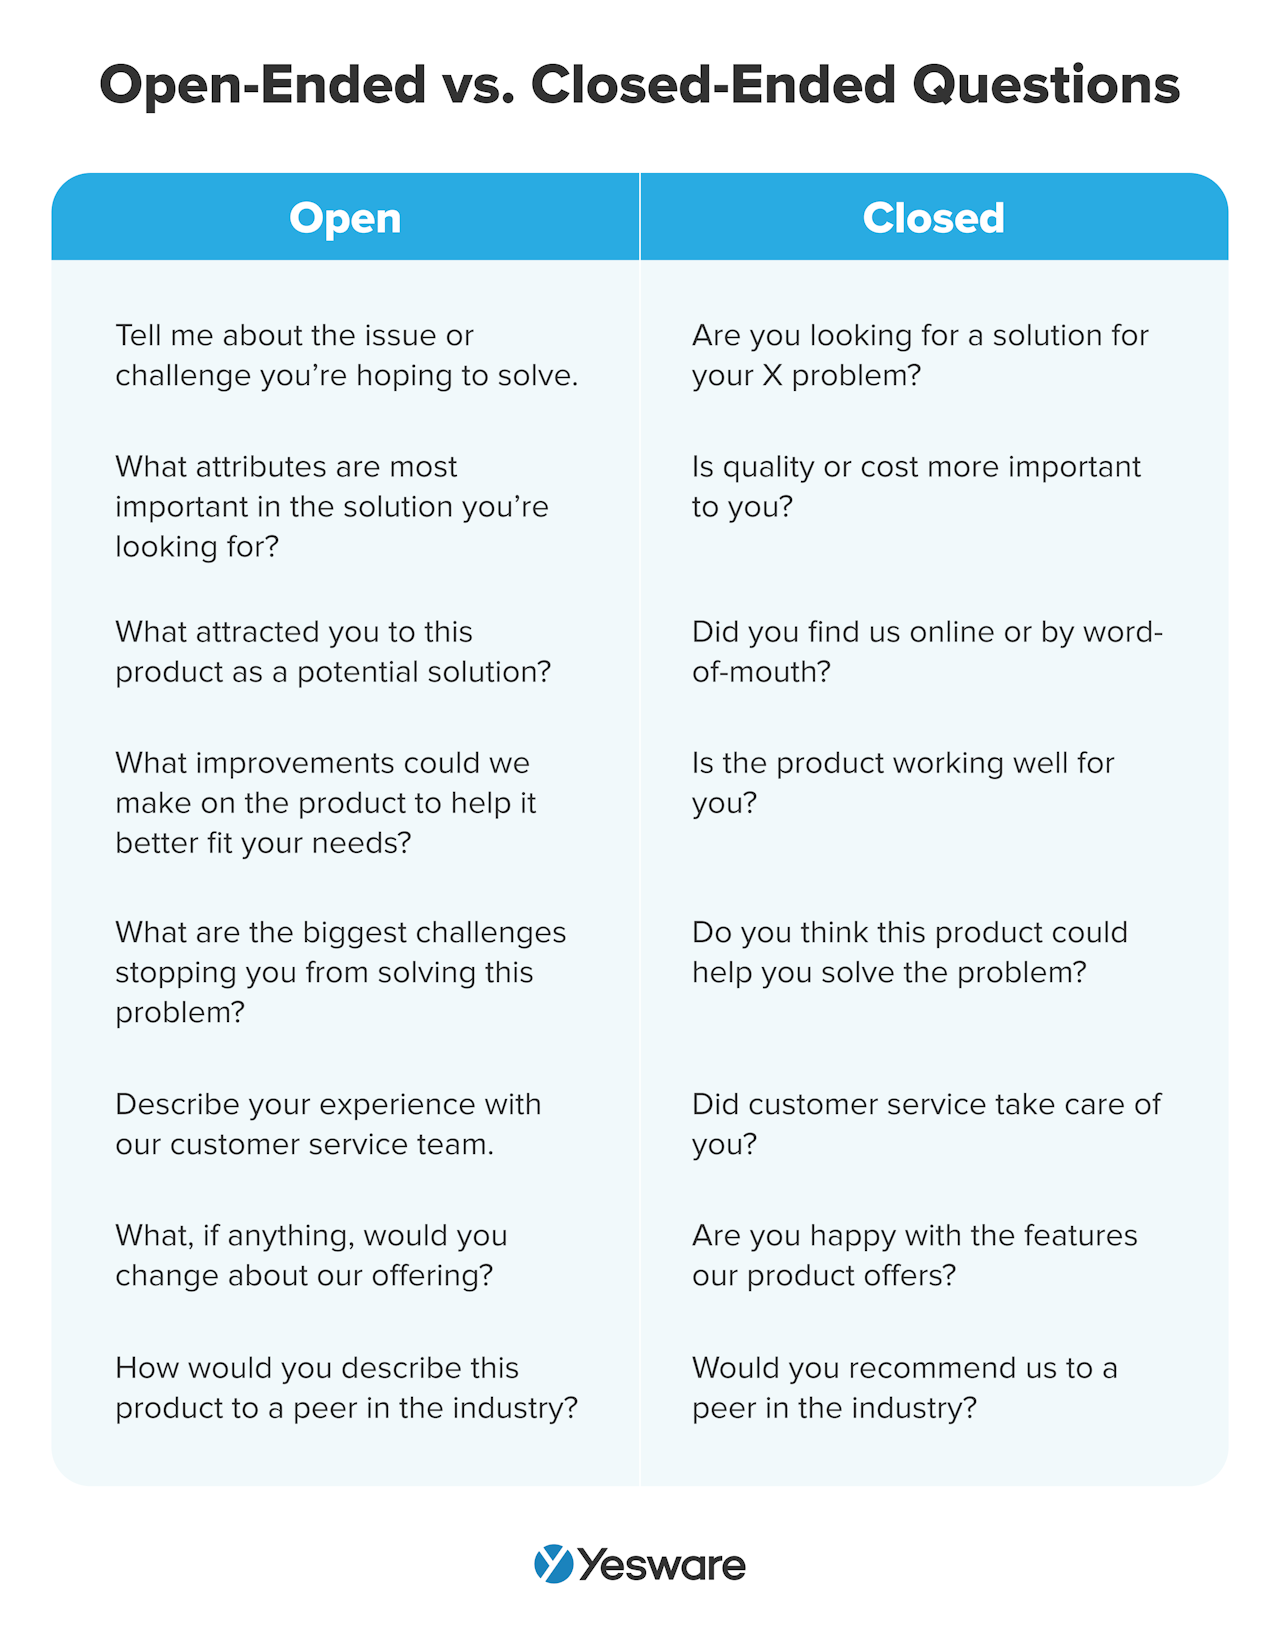 how to convert leads into sales: ask open-ended questions